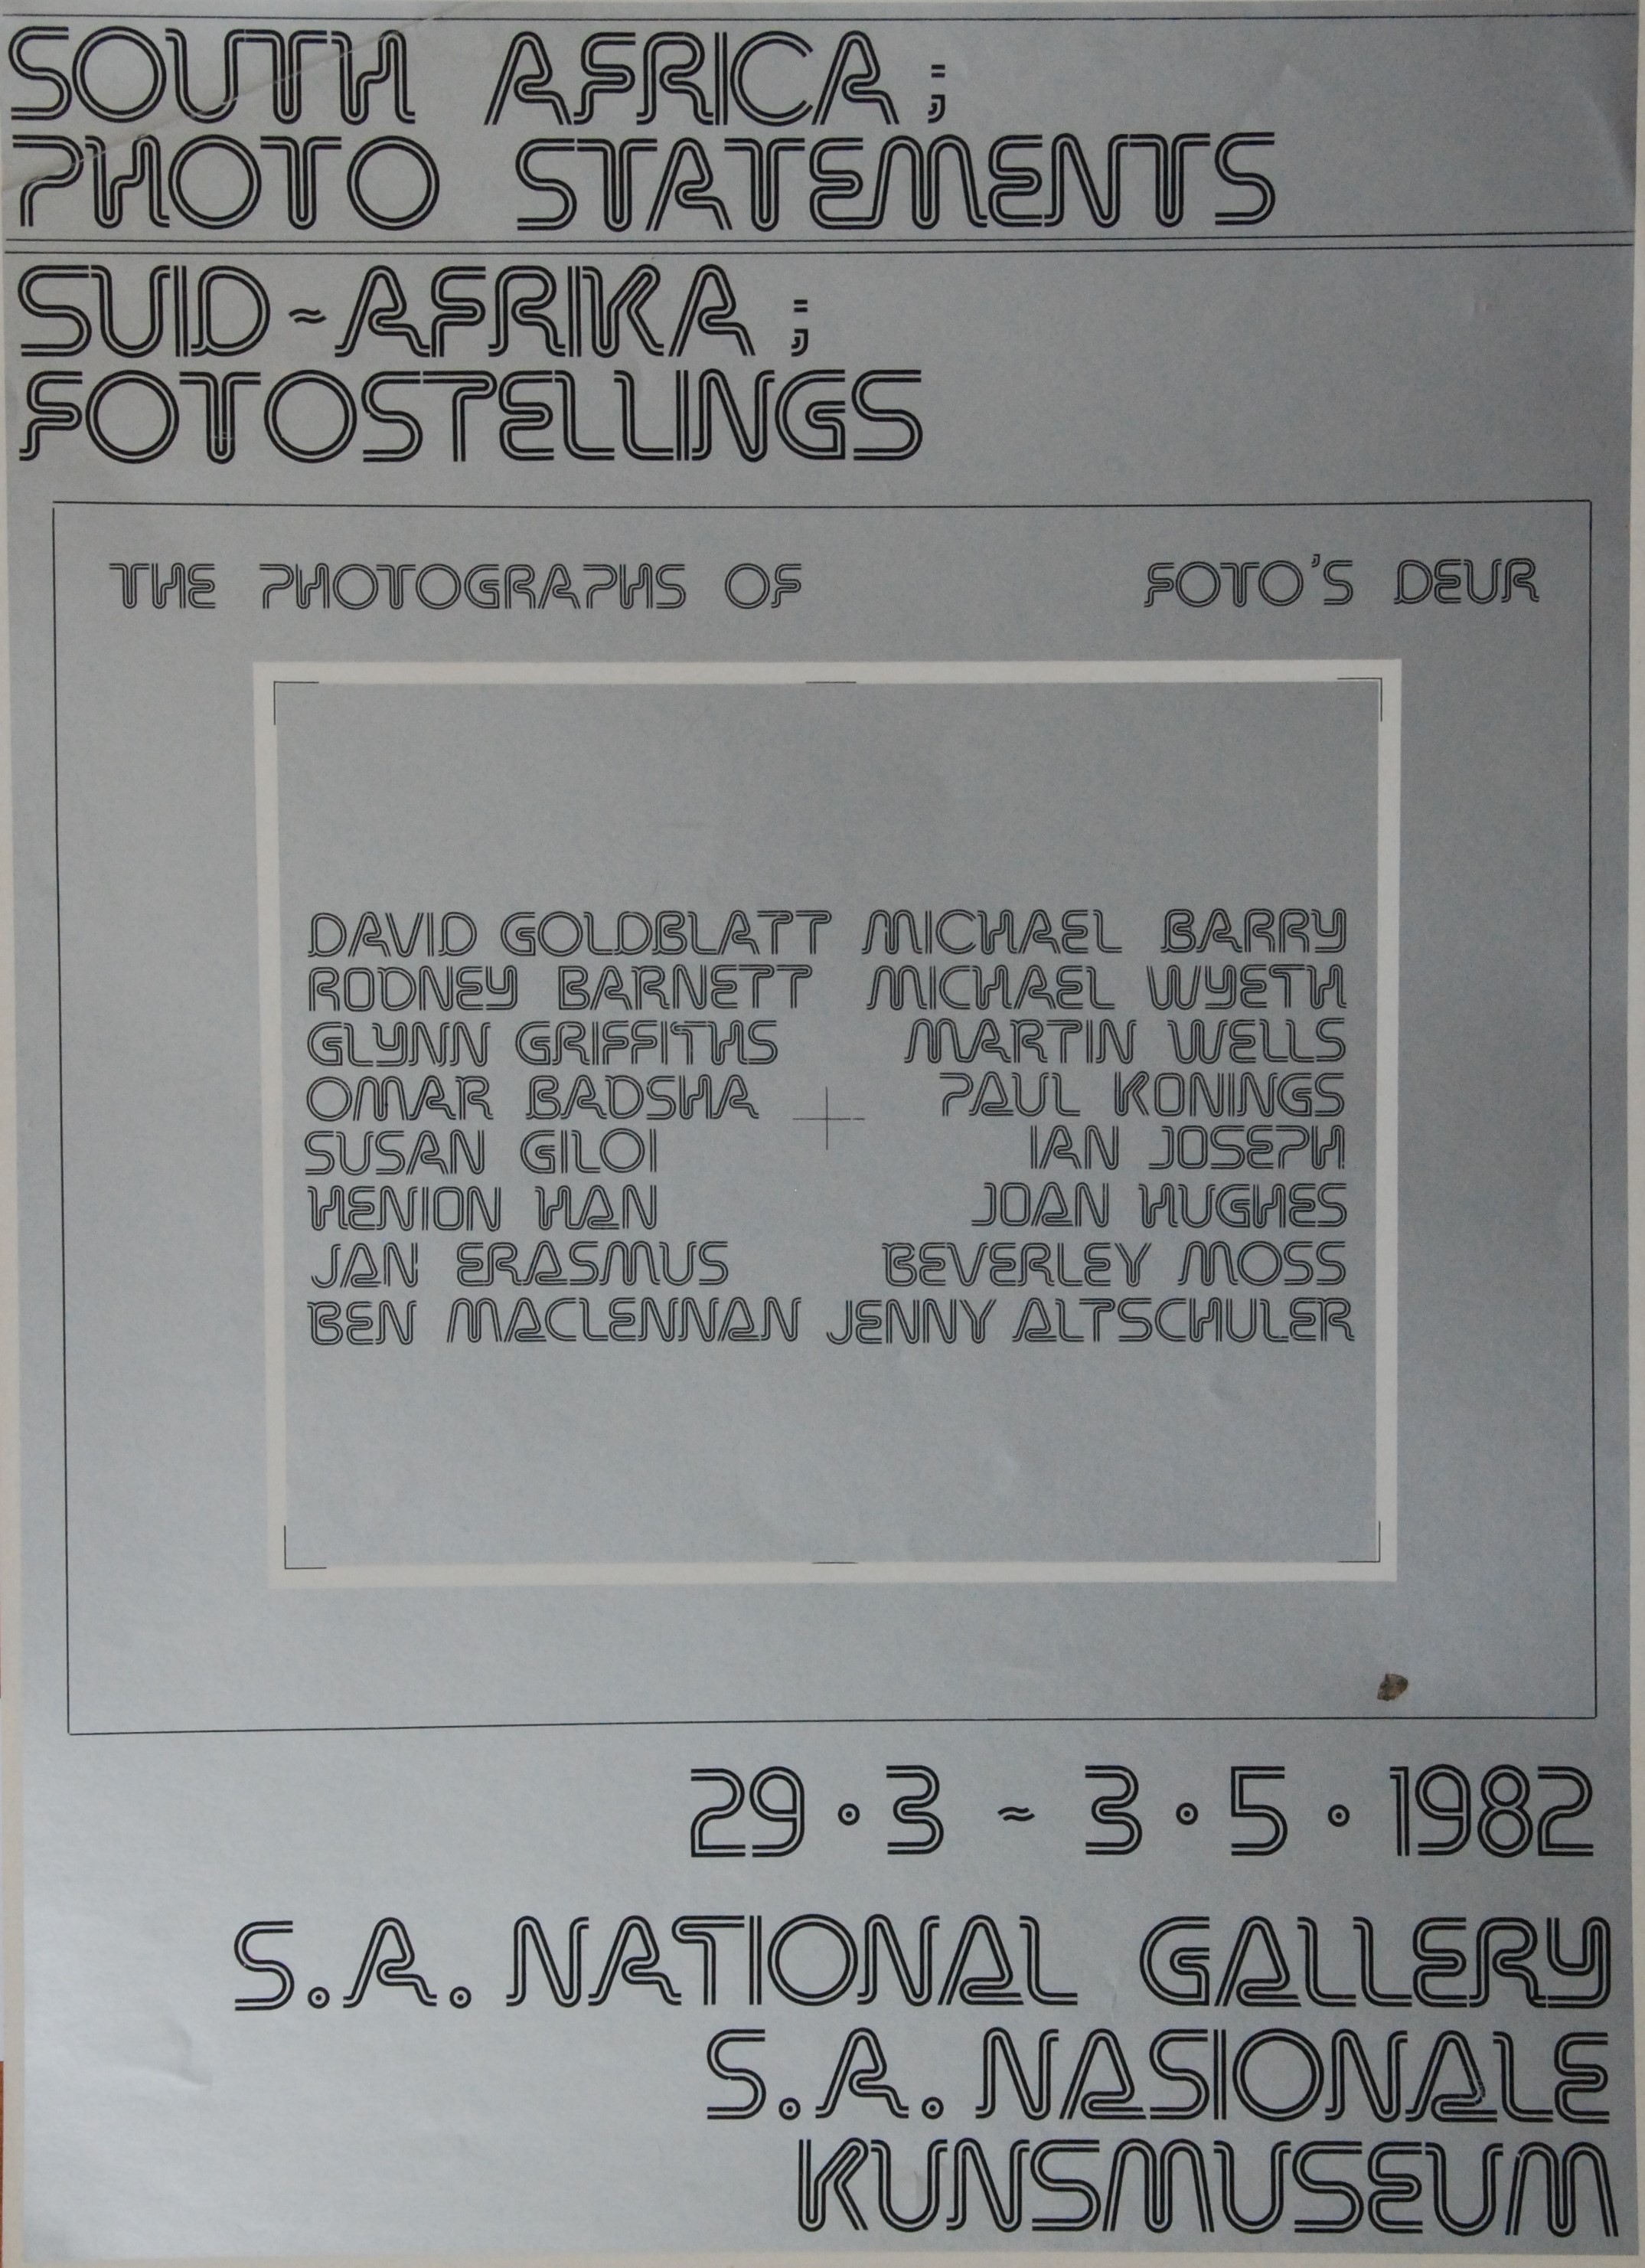 South Africa: Photo Statements Poster 1982